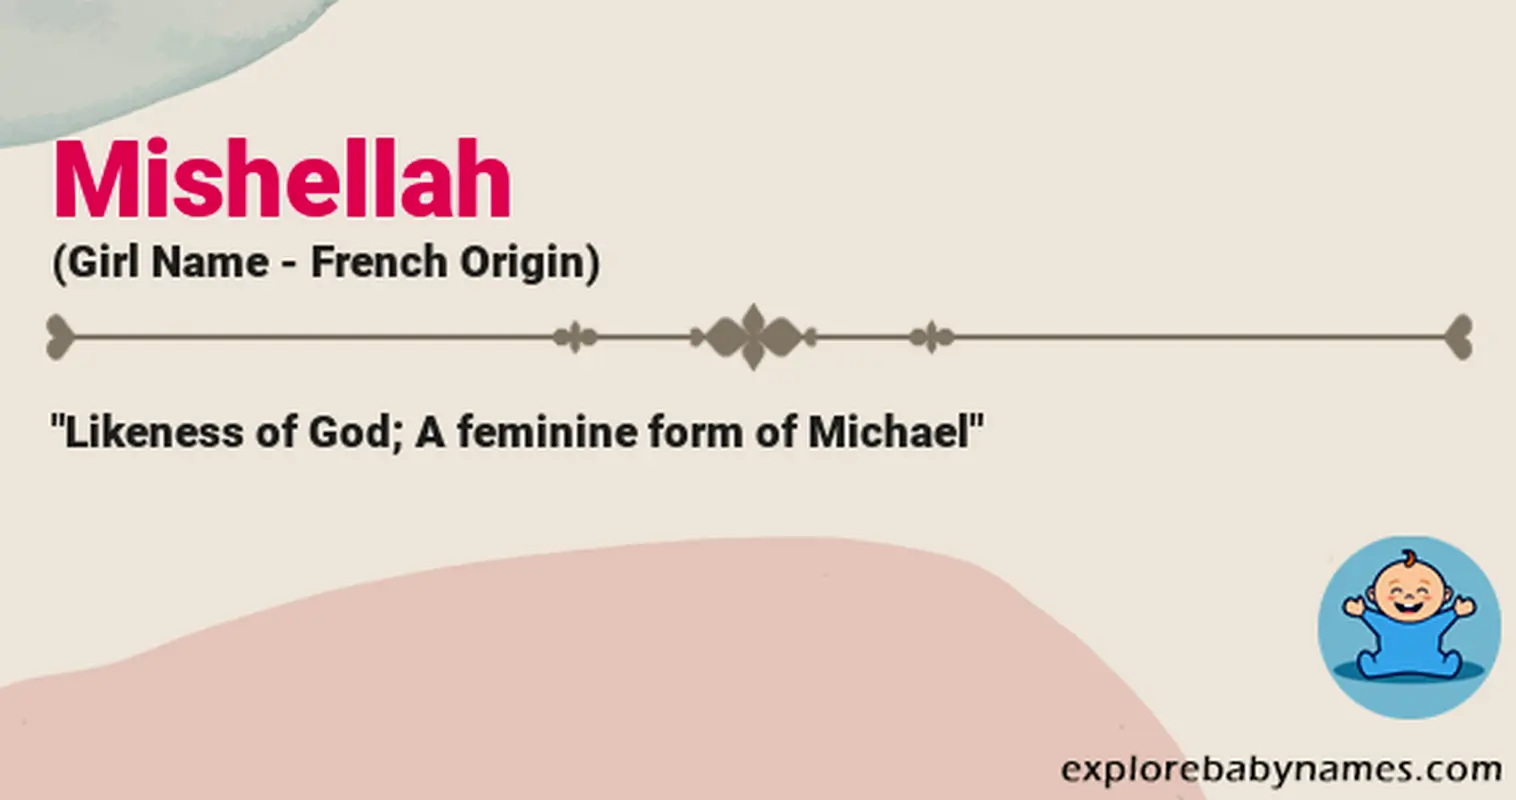 Meaning of Mishellah